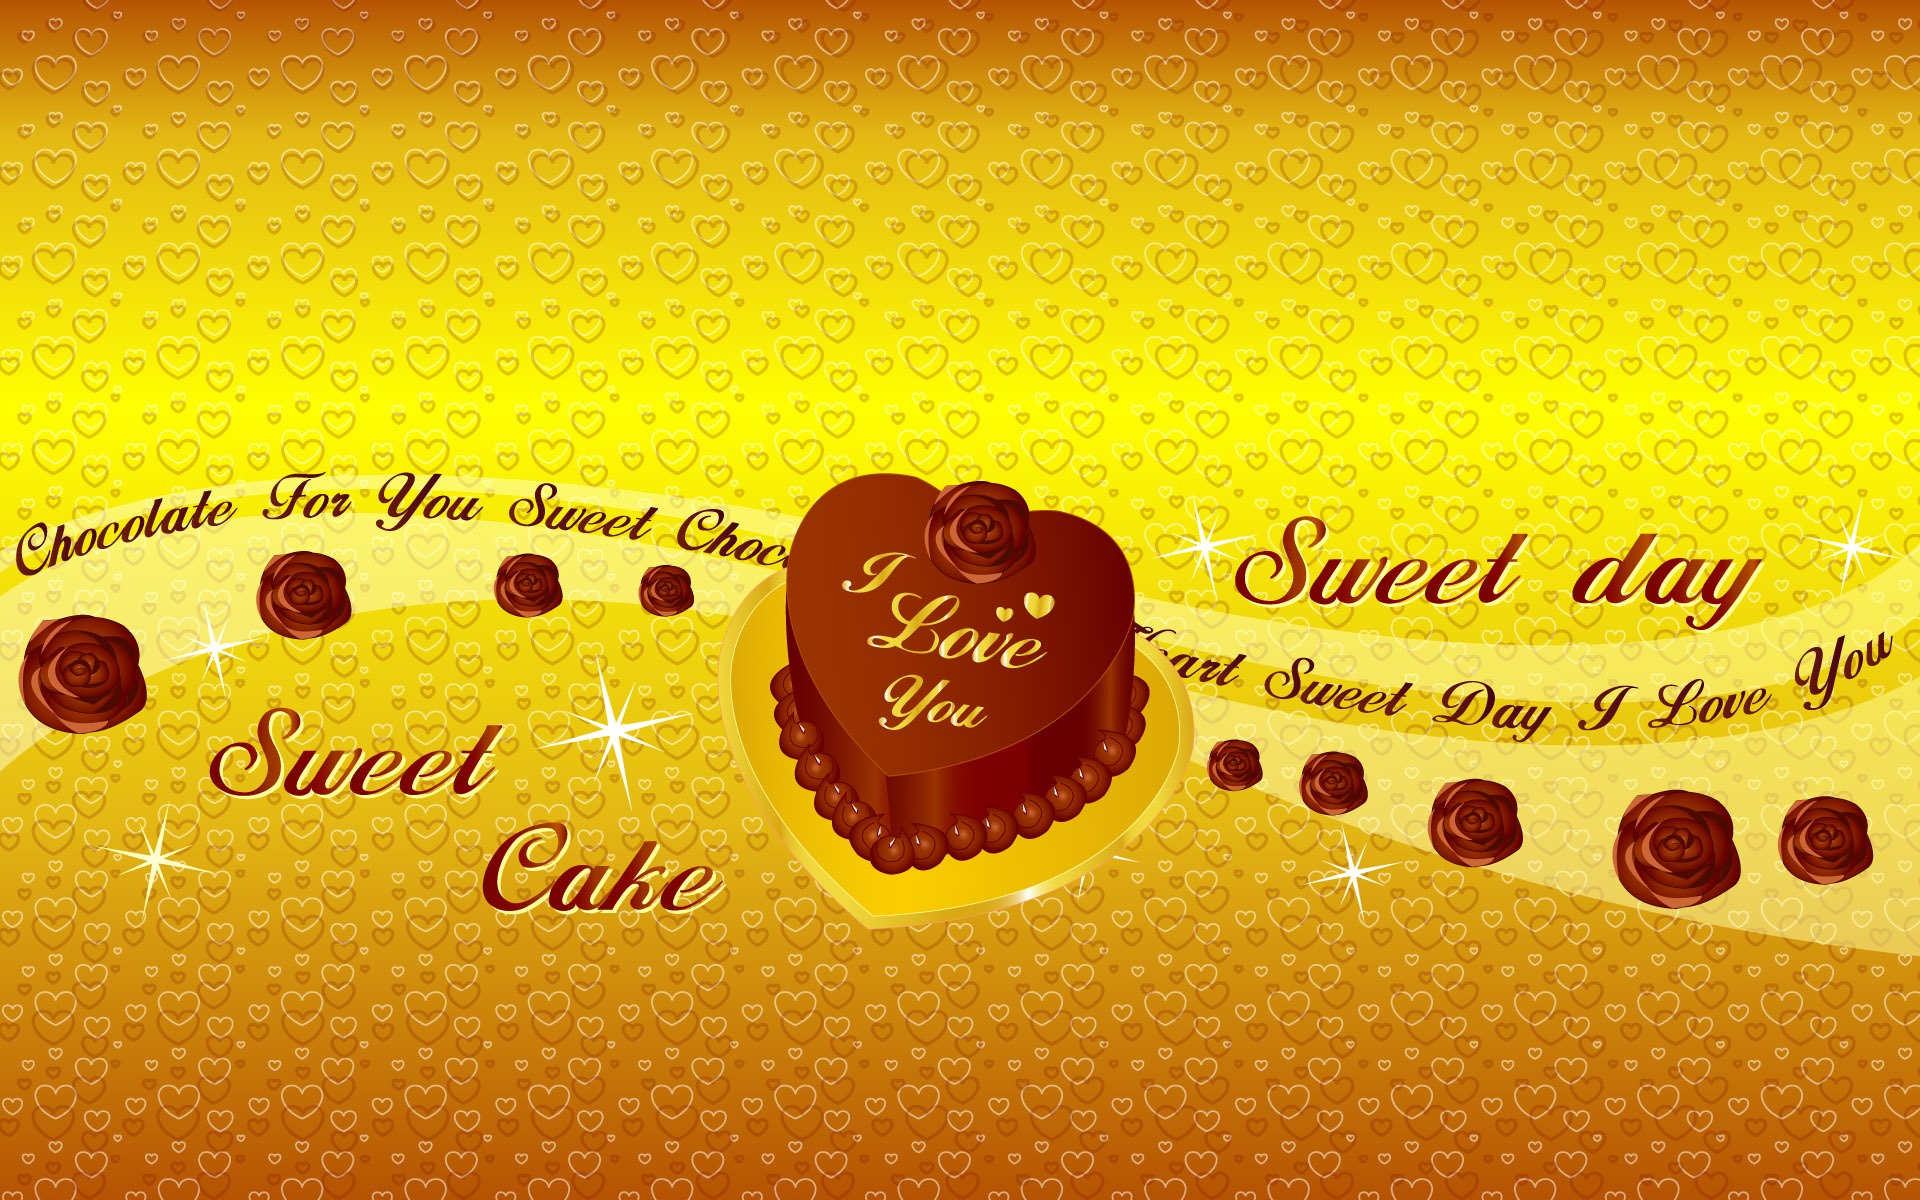 Valentine's Day Theme Wallpapers (1) #8 - 1920x1200